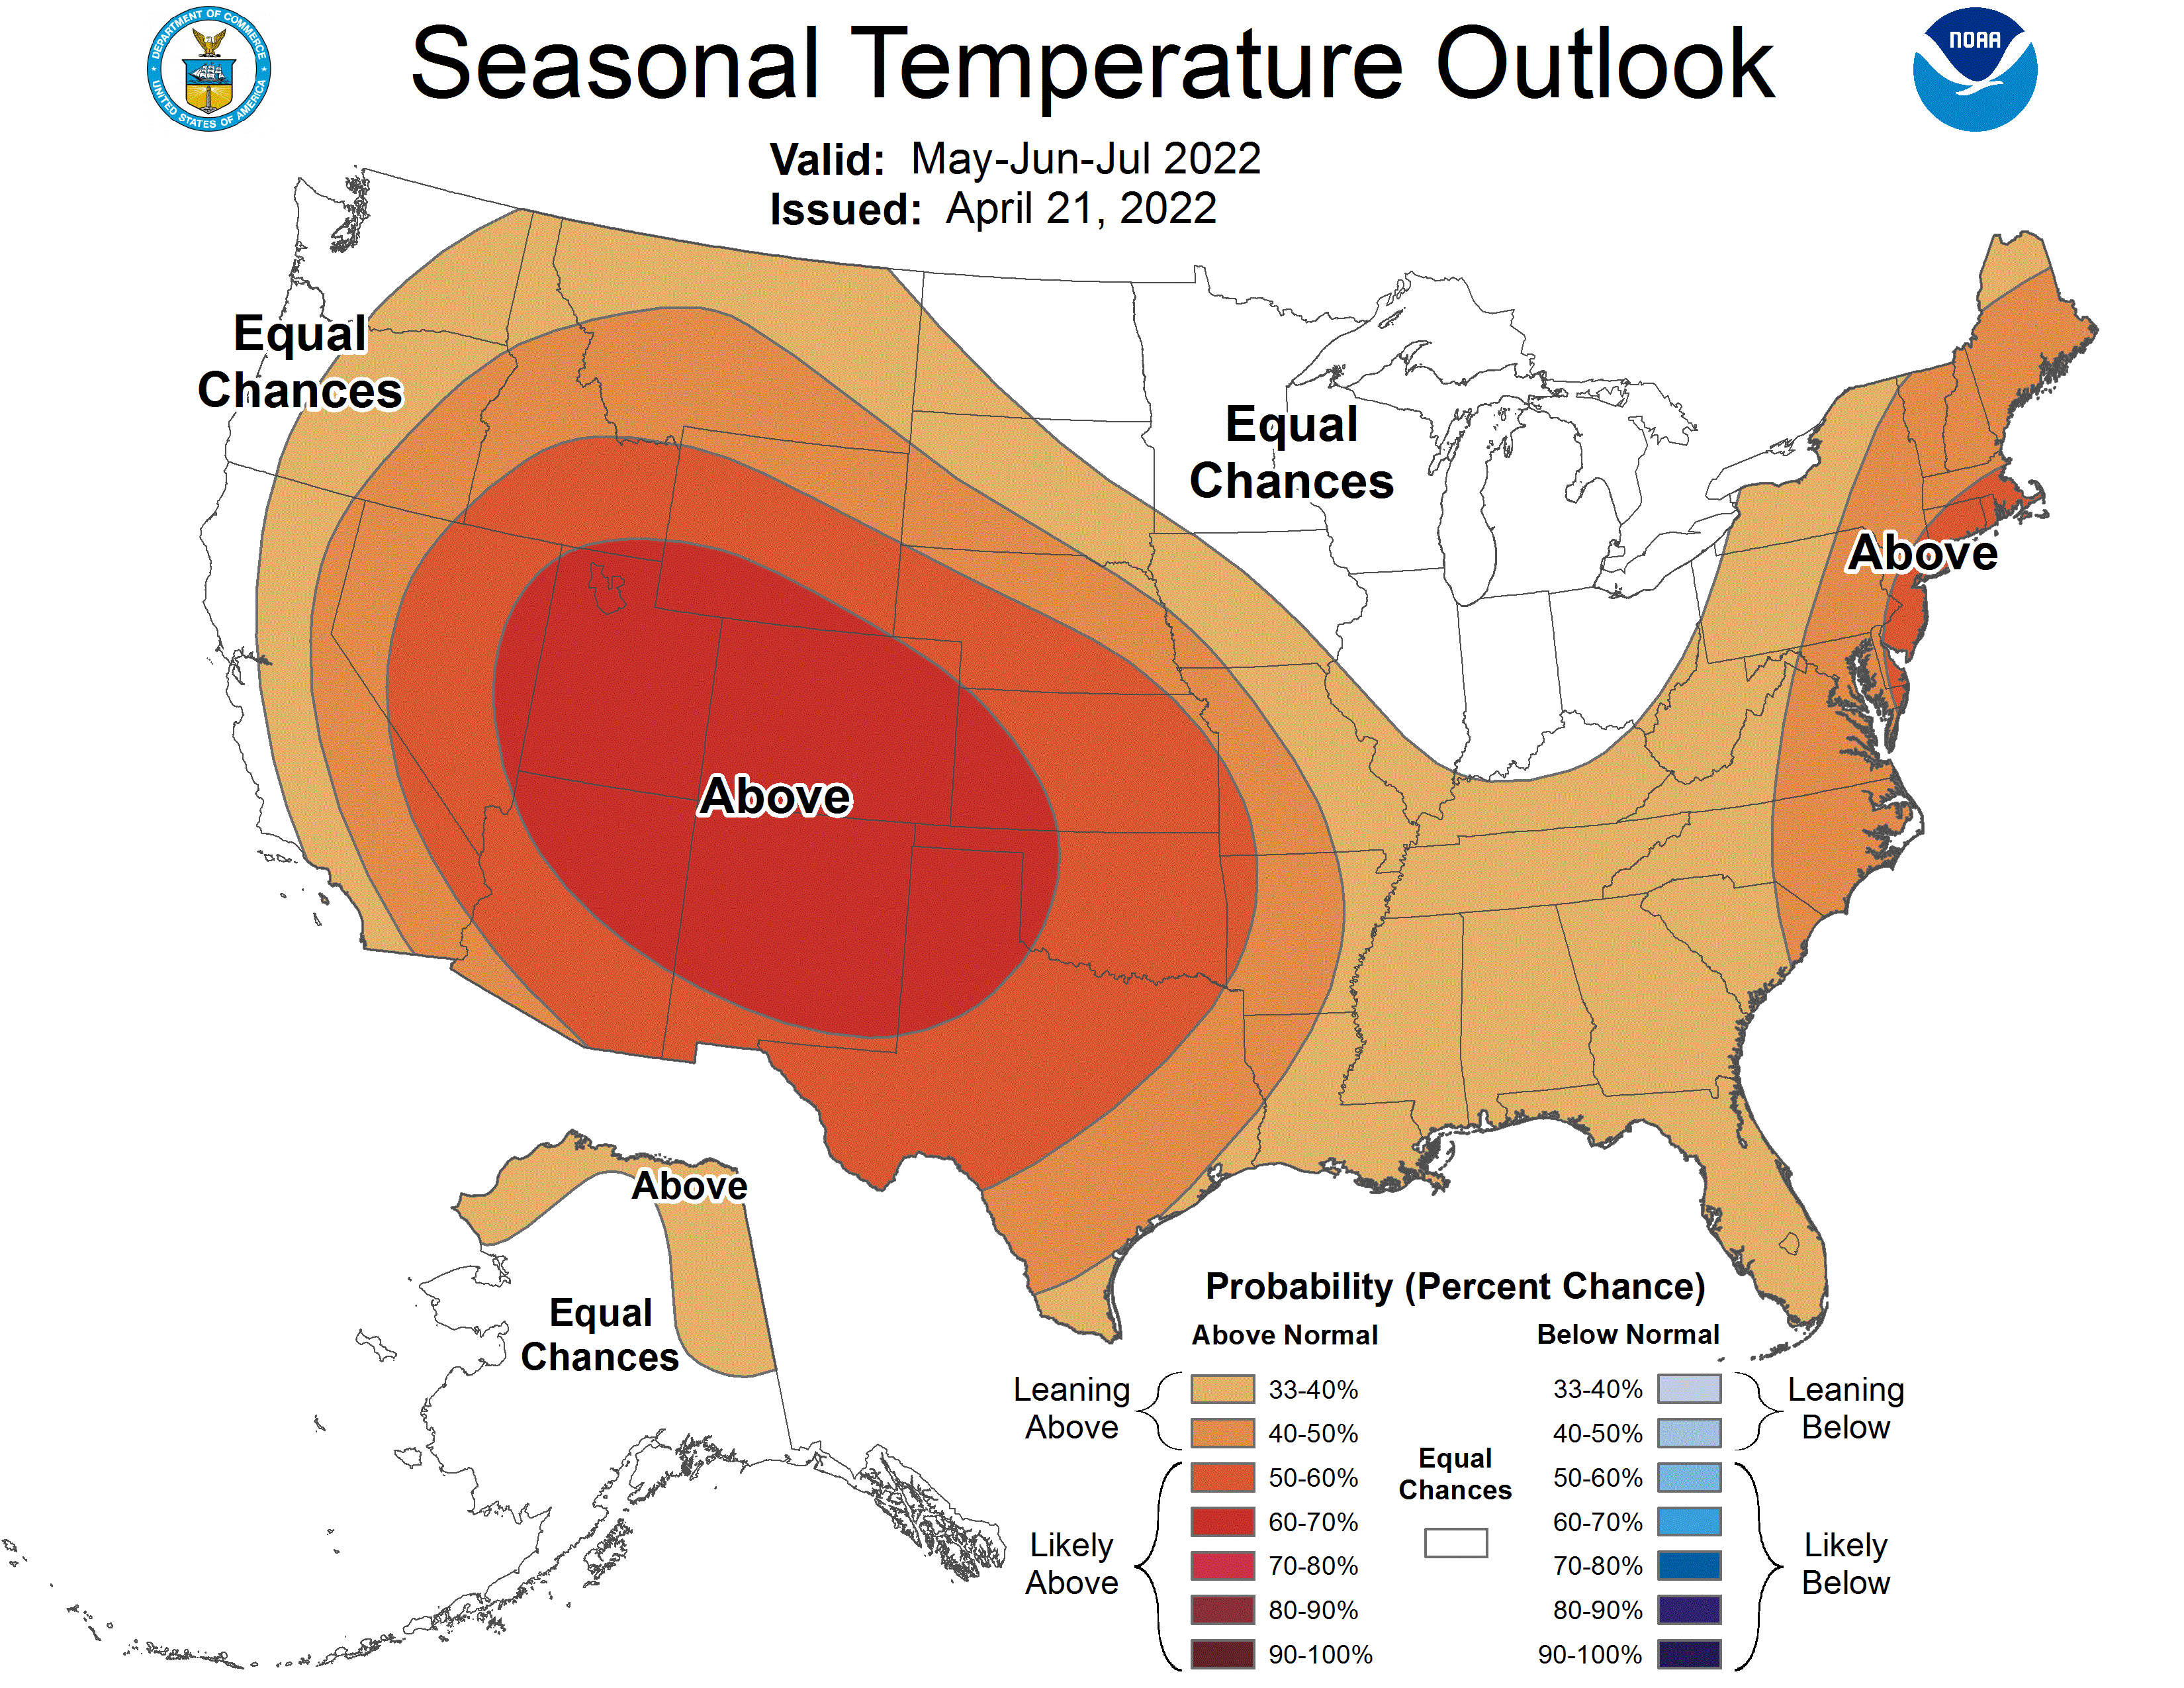 Figure 1. Temperature outlook for the May-June-July 2022 period. These are produced by the national Climate Prediction Center and illustrate confidence of favoring above- or below-normal conditions.